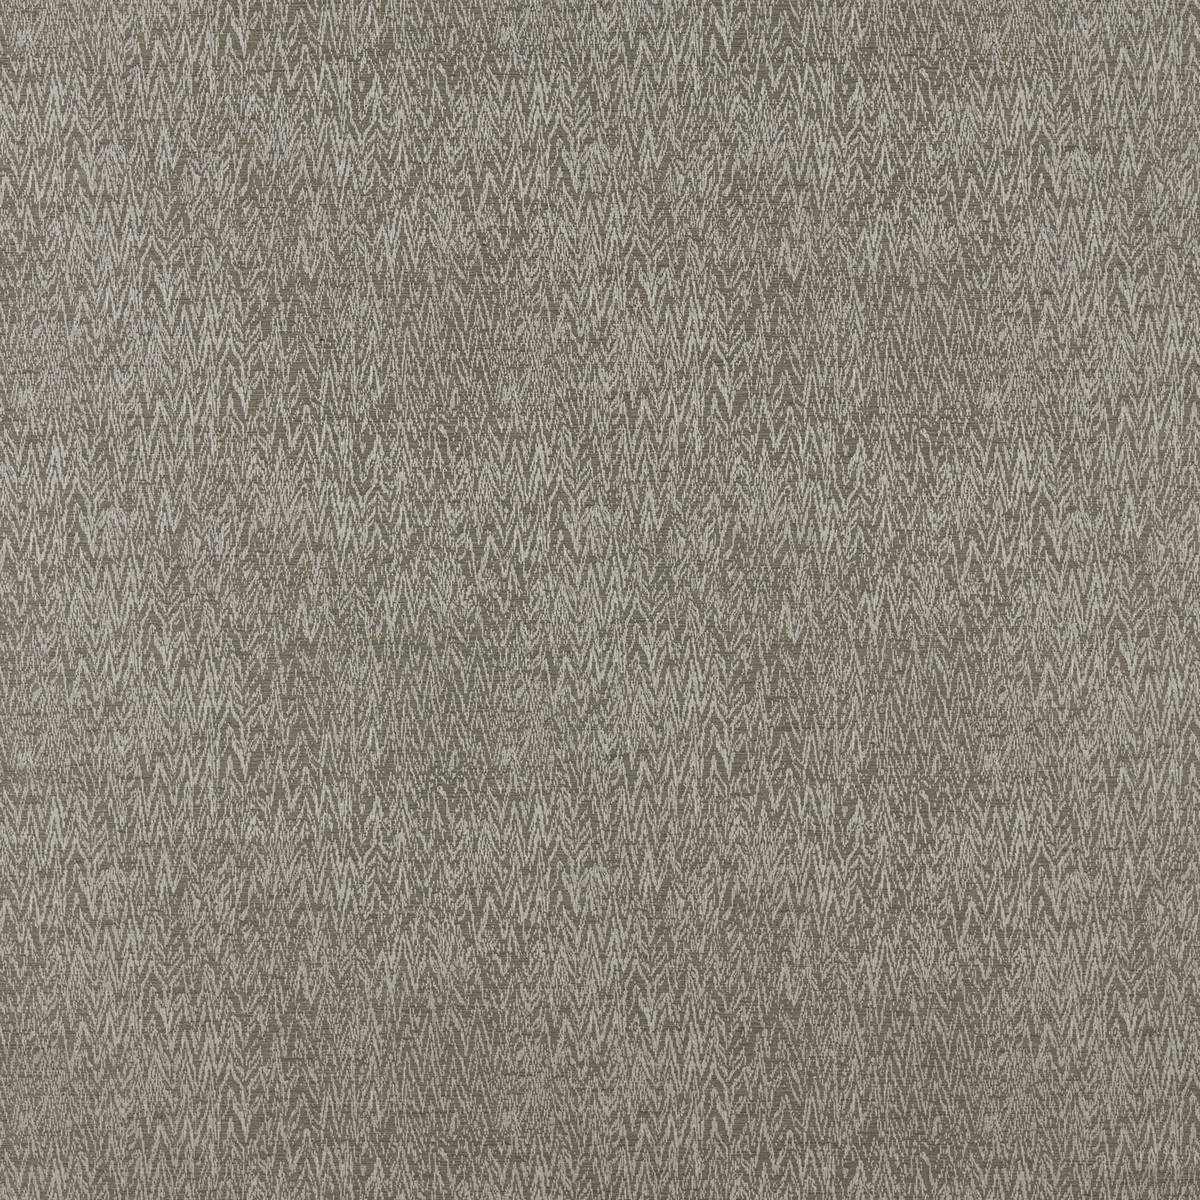 Aves Sepia Fabric by Harlequin